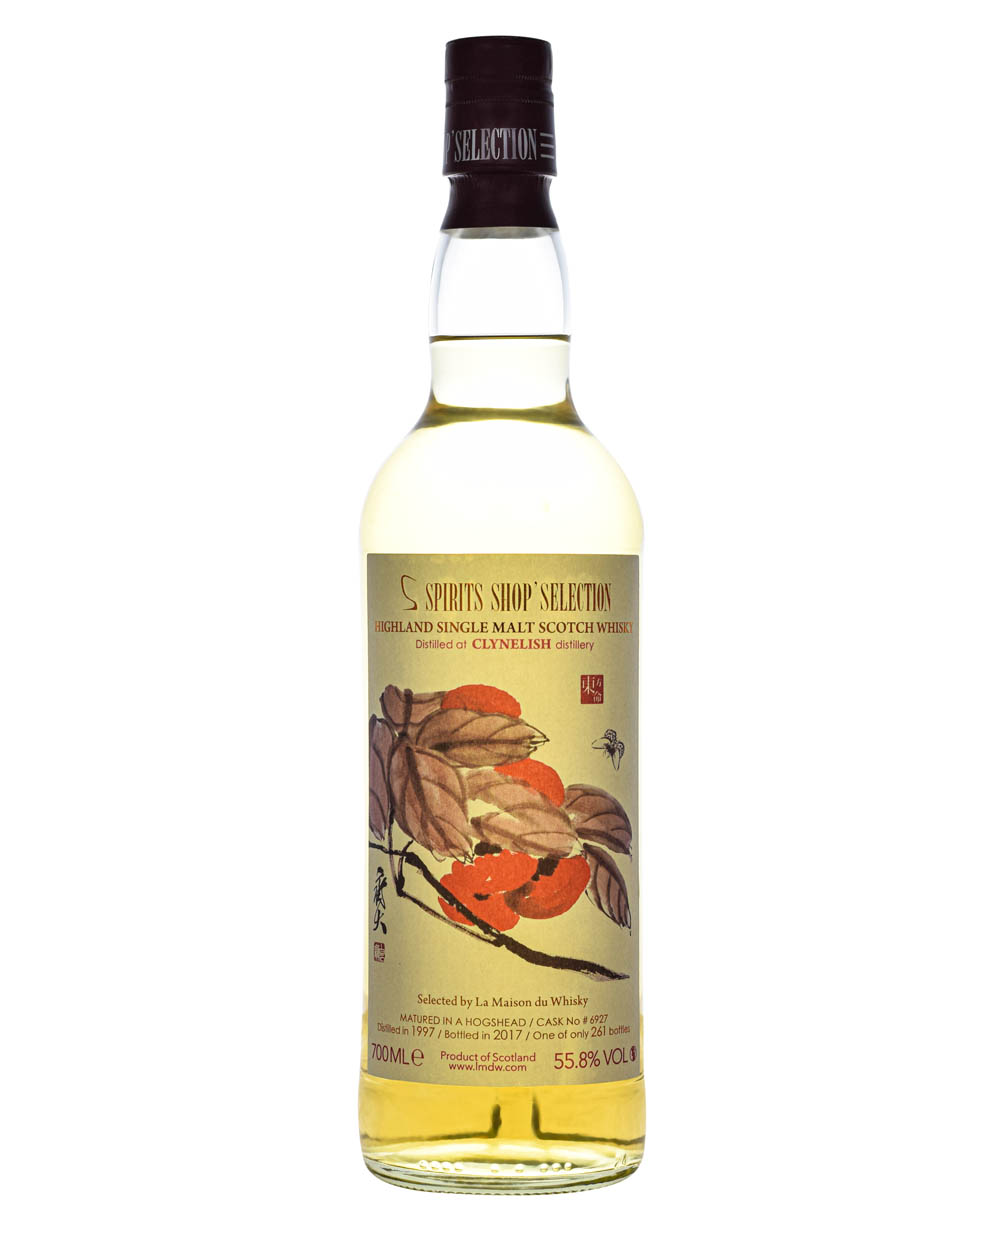 Clynelish 1997 Spirits' Shop Selection Musthave Malts MHM